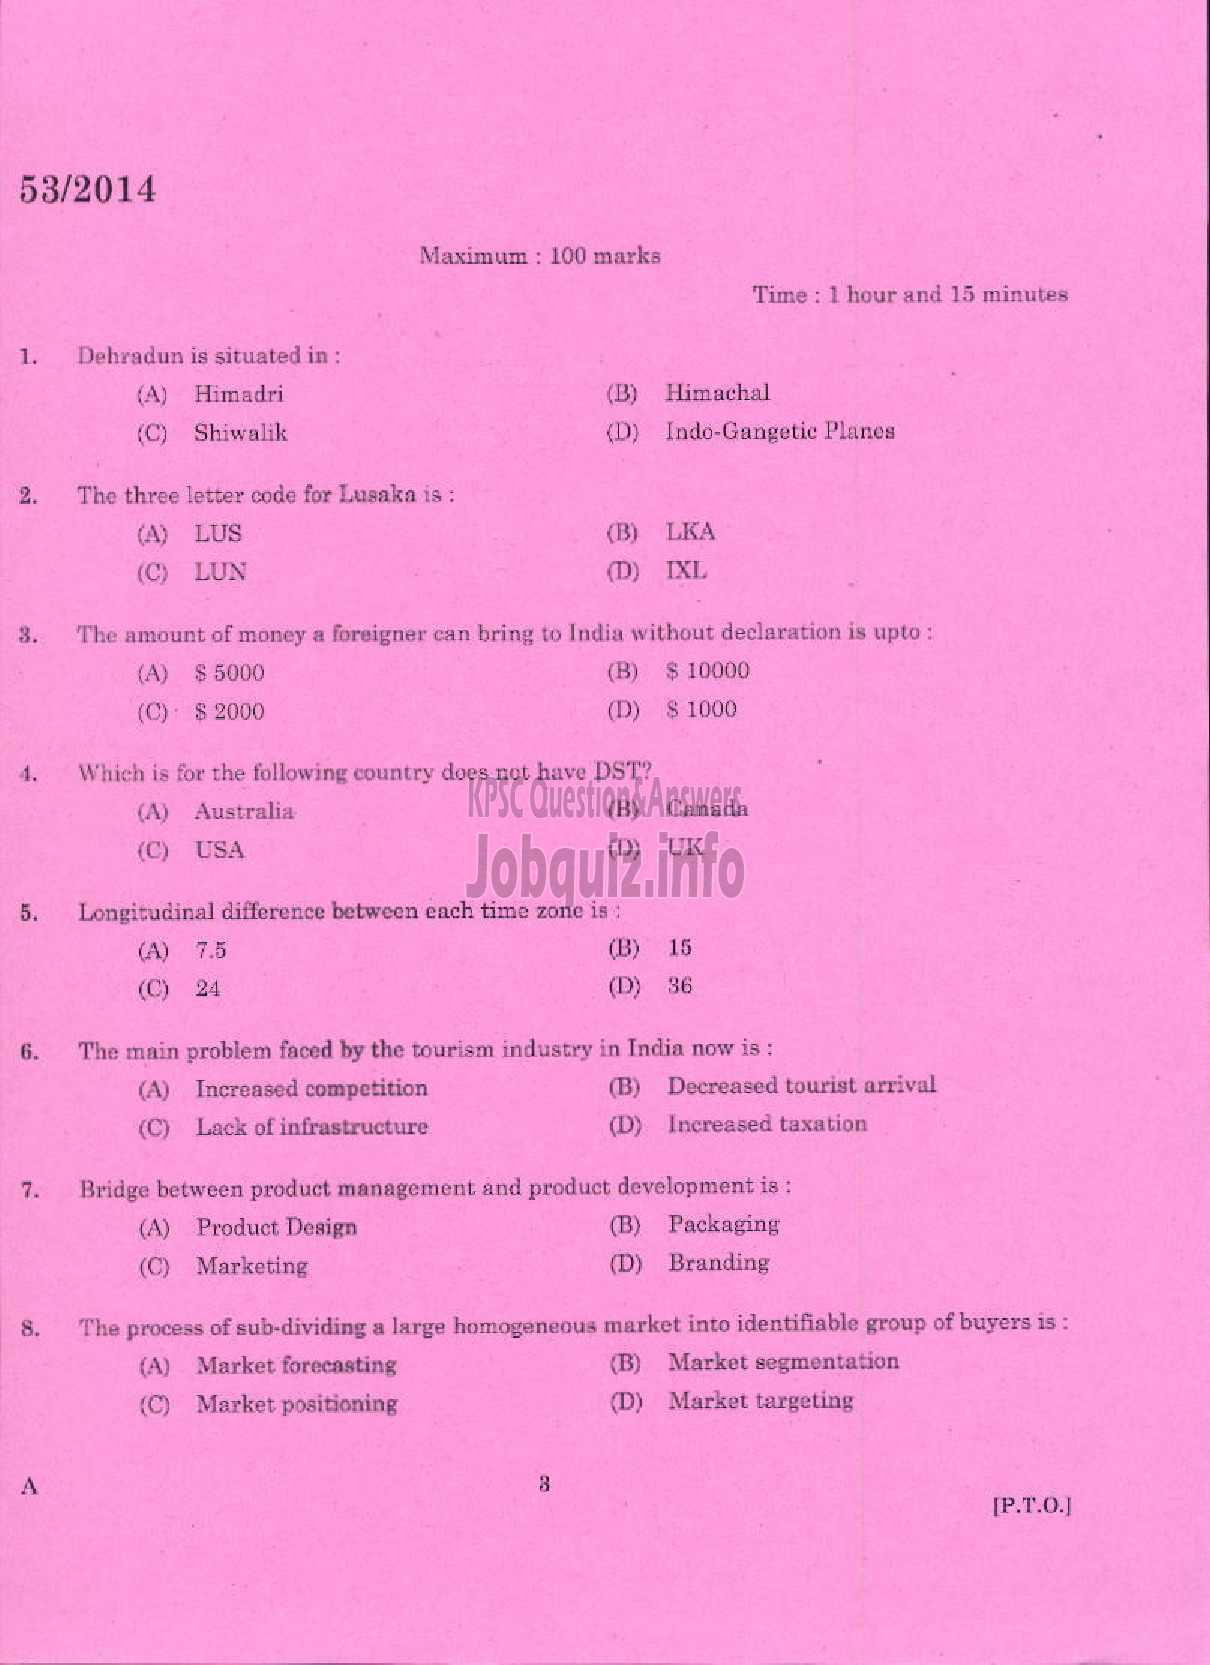 Kerala PSC Question Paper - LECTURER IN TRAVEL AND TOURISM KERALA COLLEGIATE EDUCATION-1